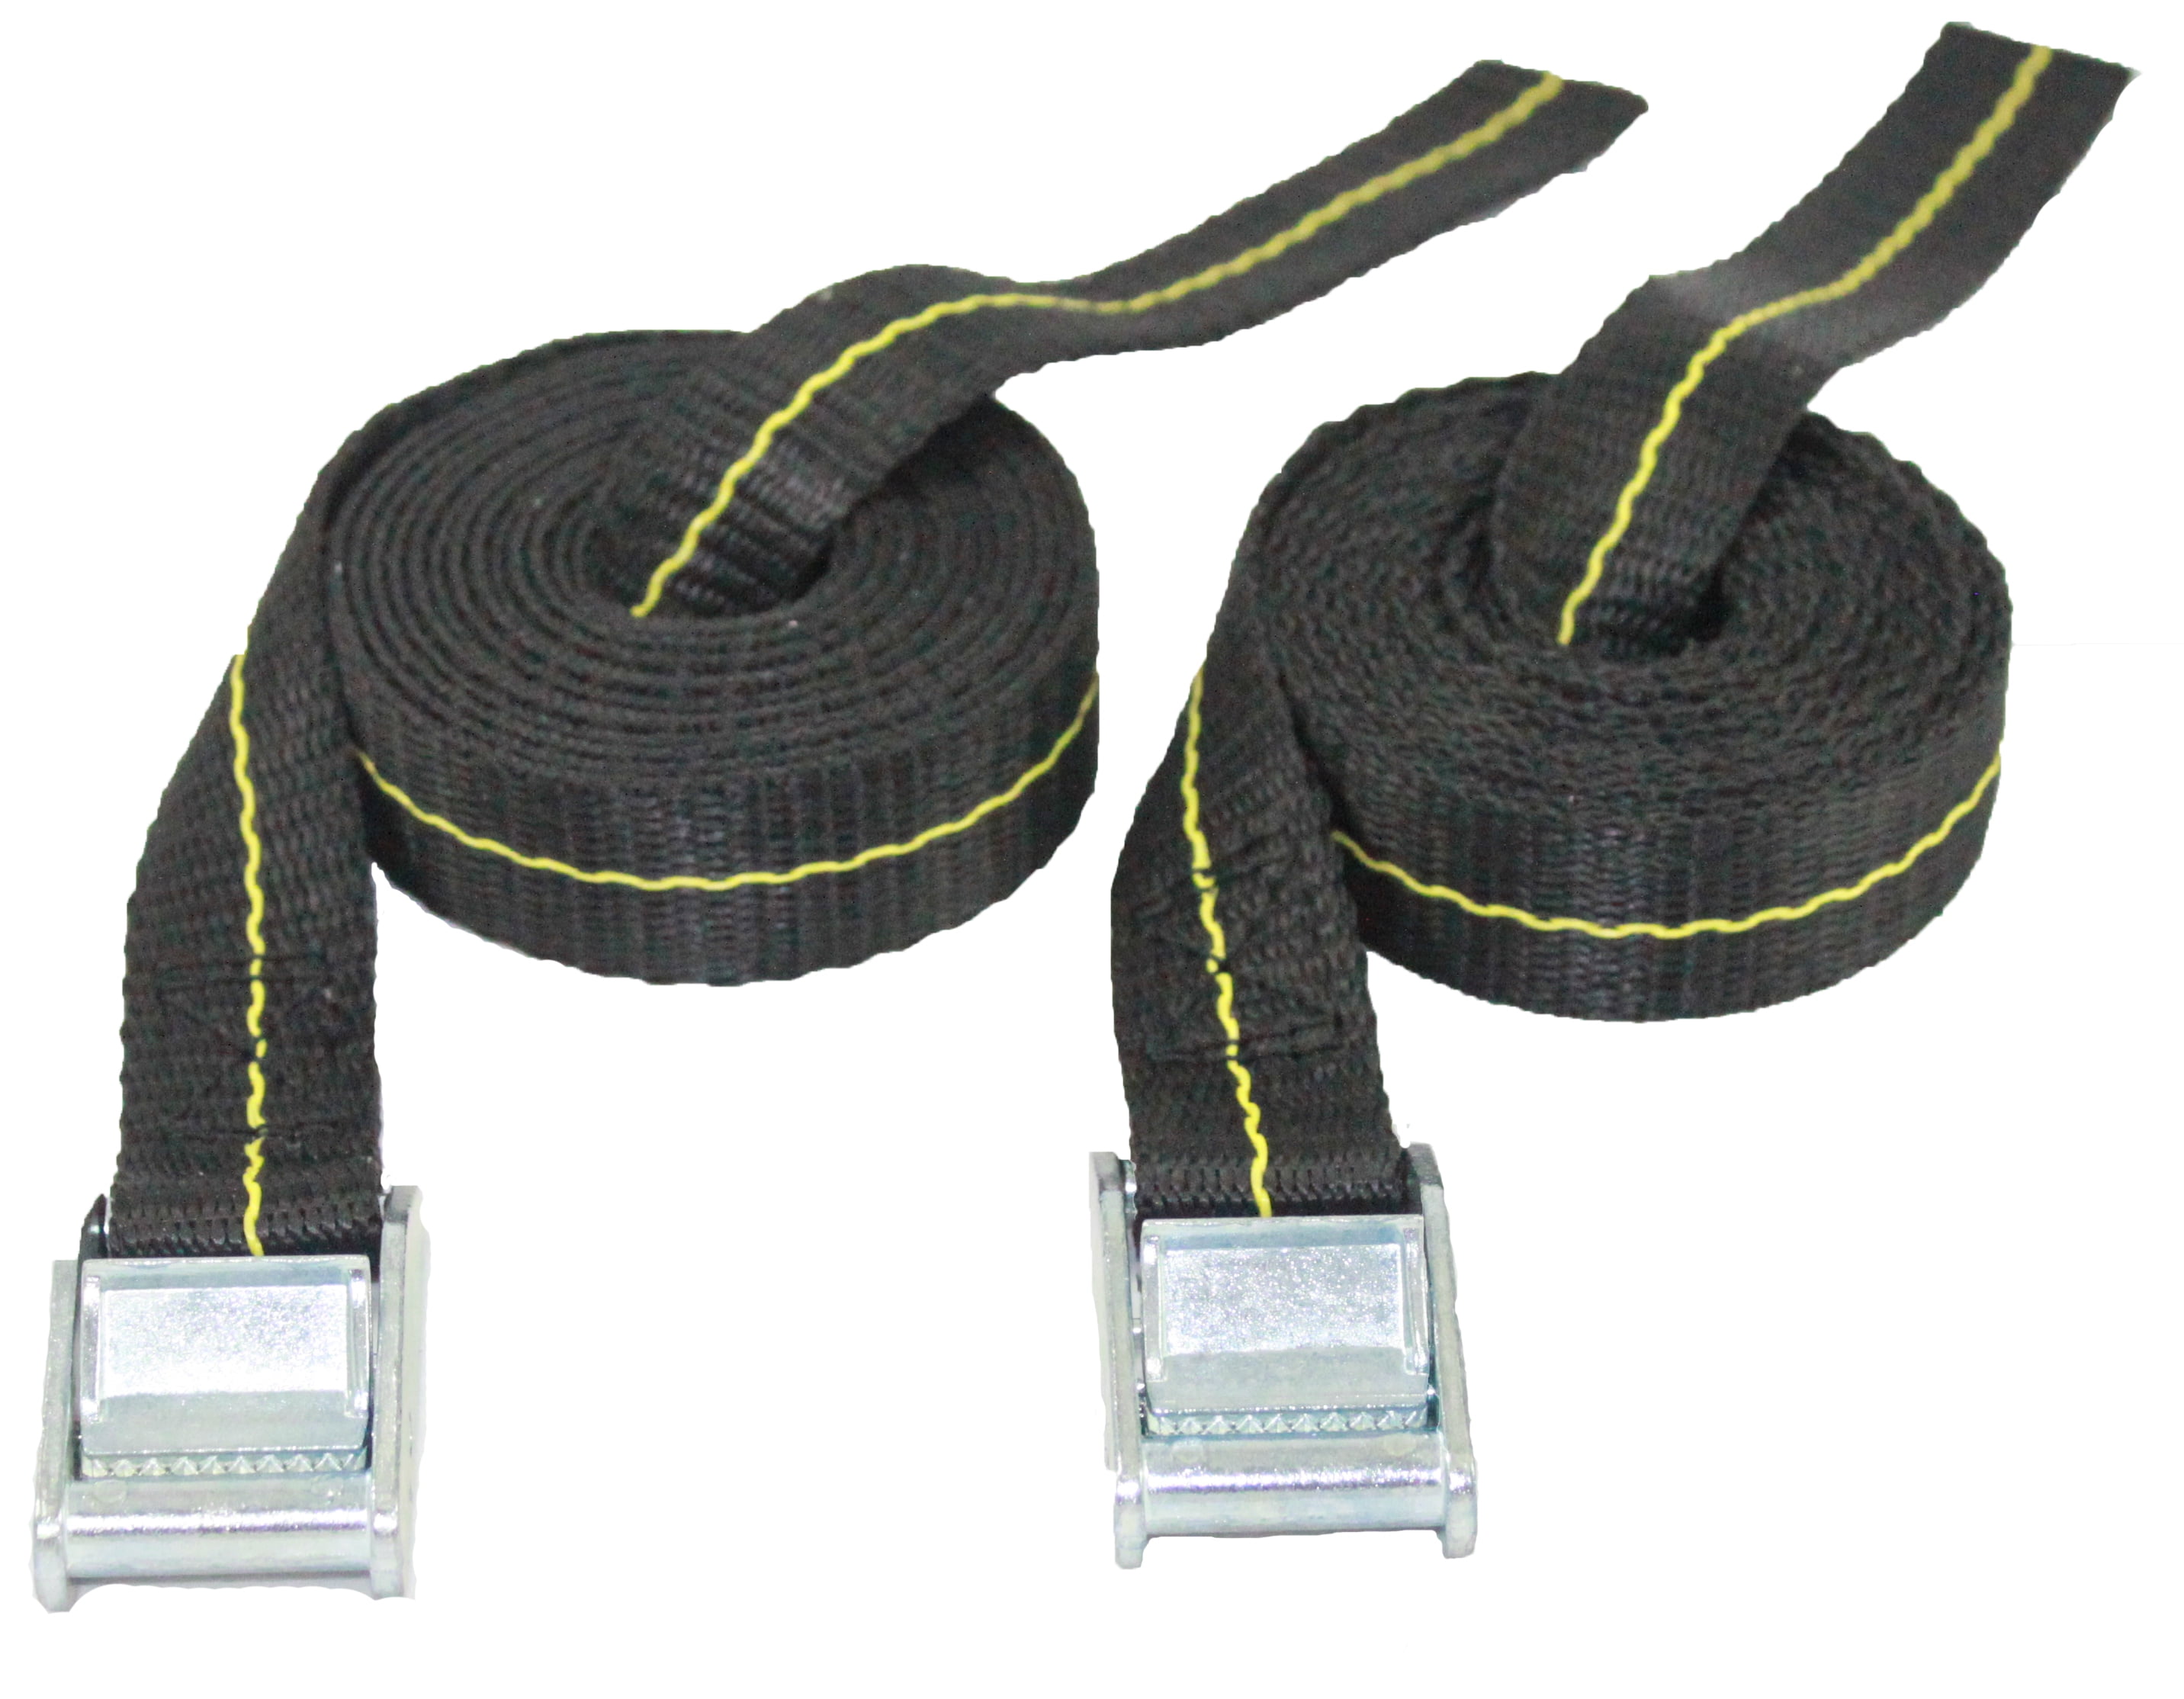 Details about   6pcs Nylon Luggage Straps Tie Down with Buckle for Kayak Carrier Canoe Hammock 